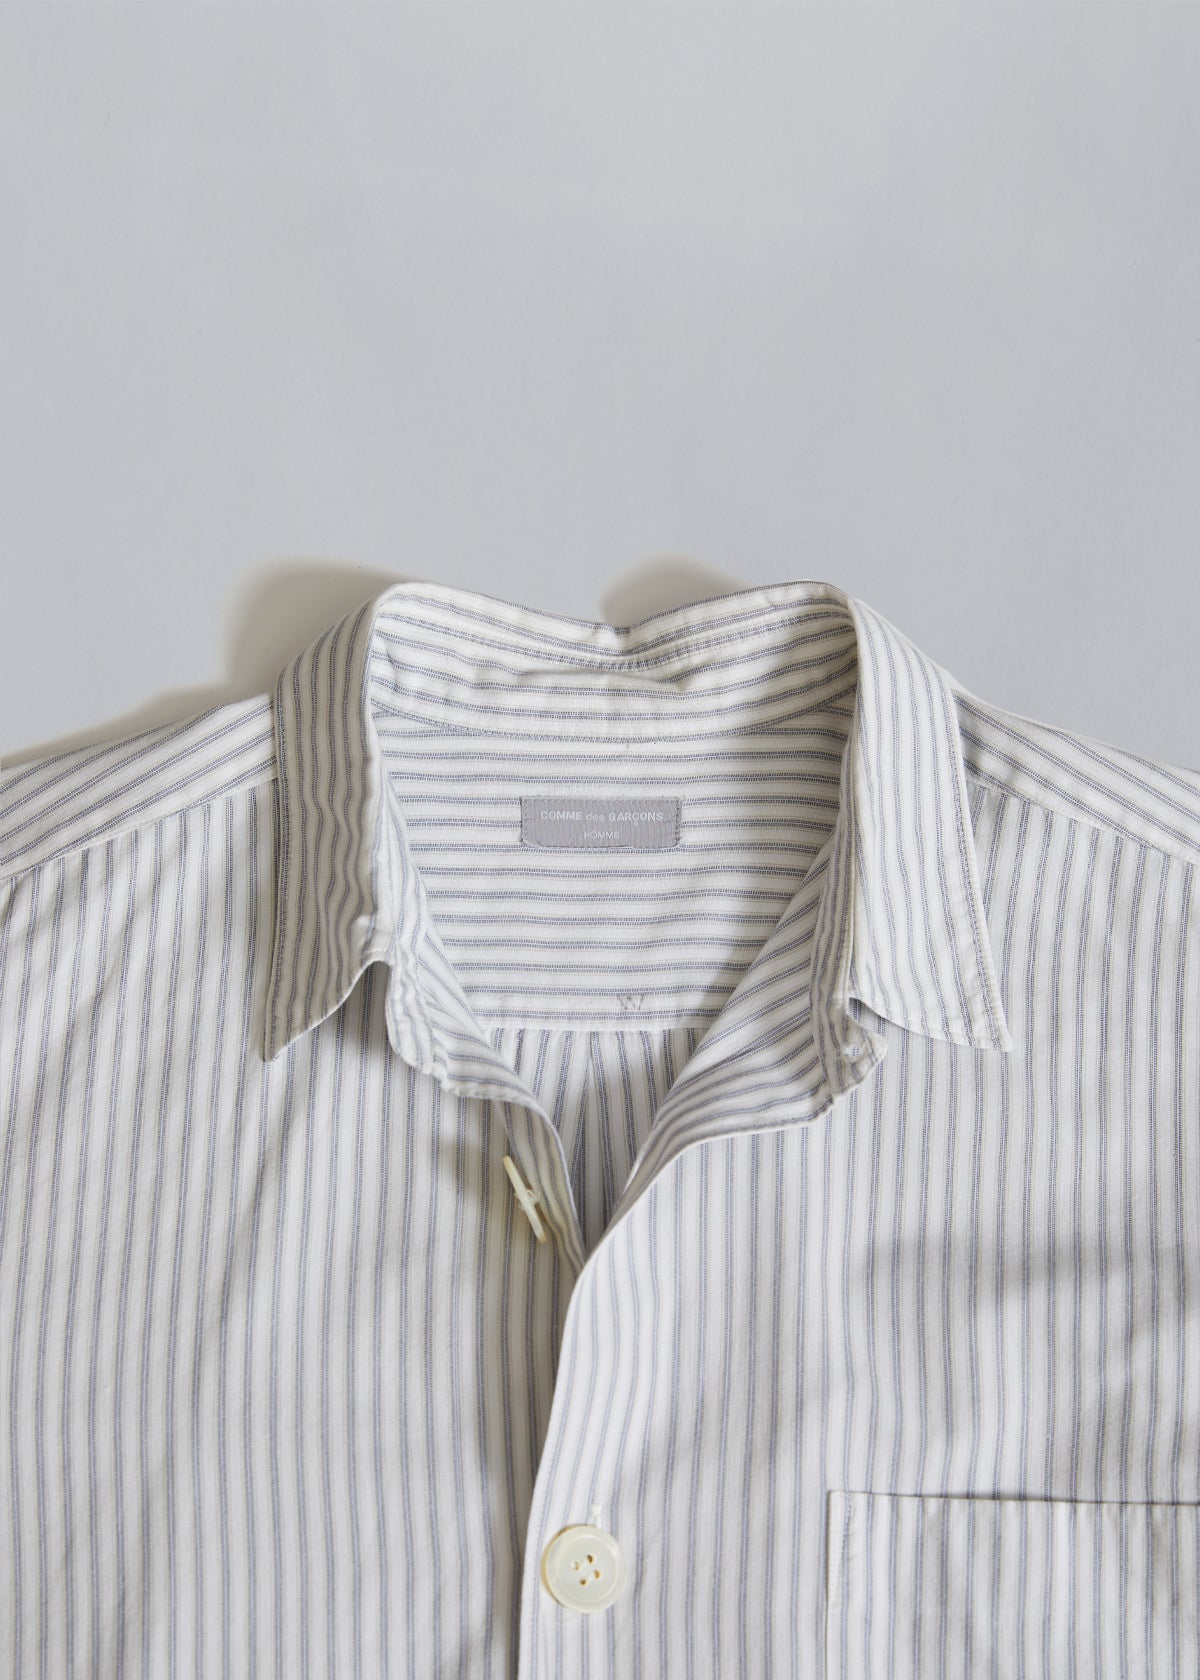 CDG Homme Gradual Buttons Striped Shirt 1980's - Large